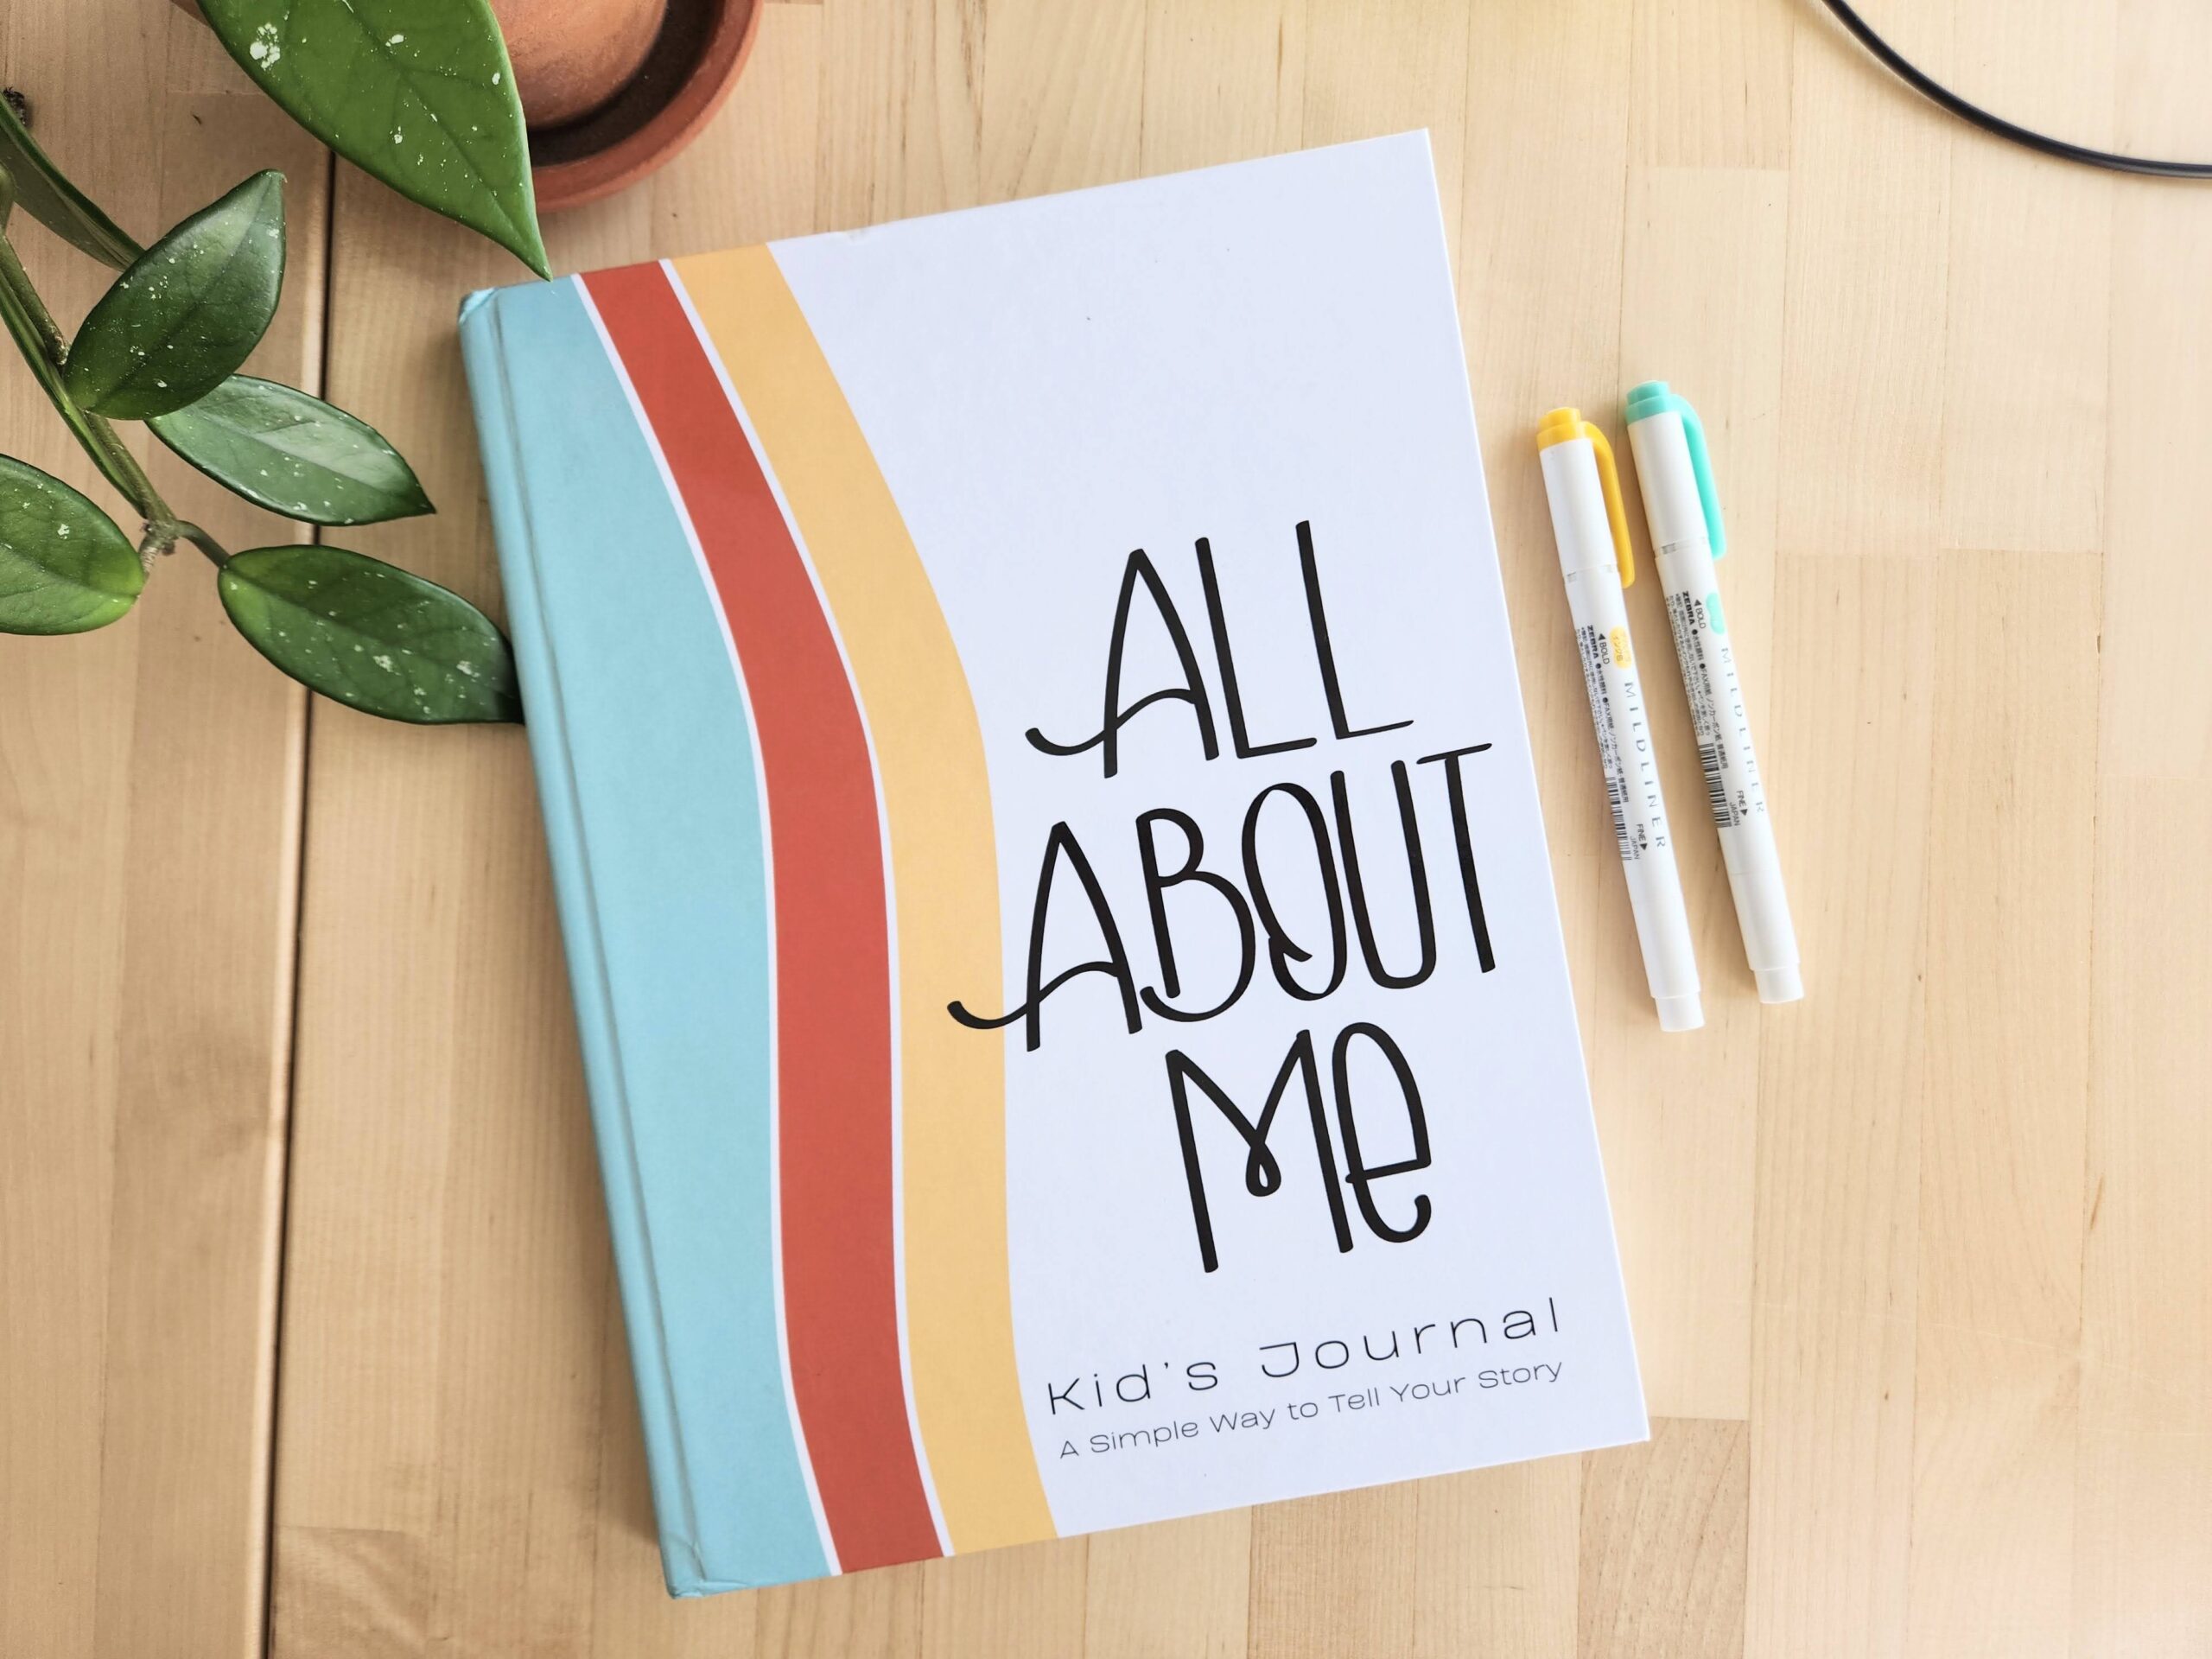 All About Me Kid's Journal